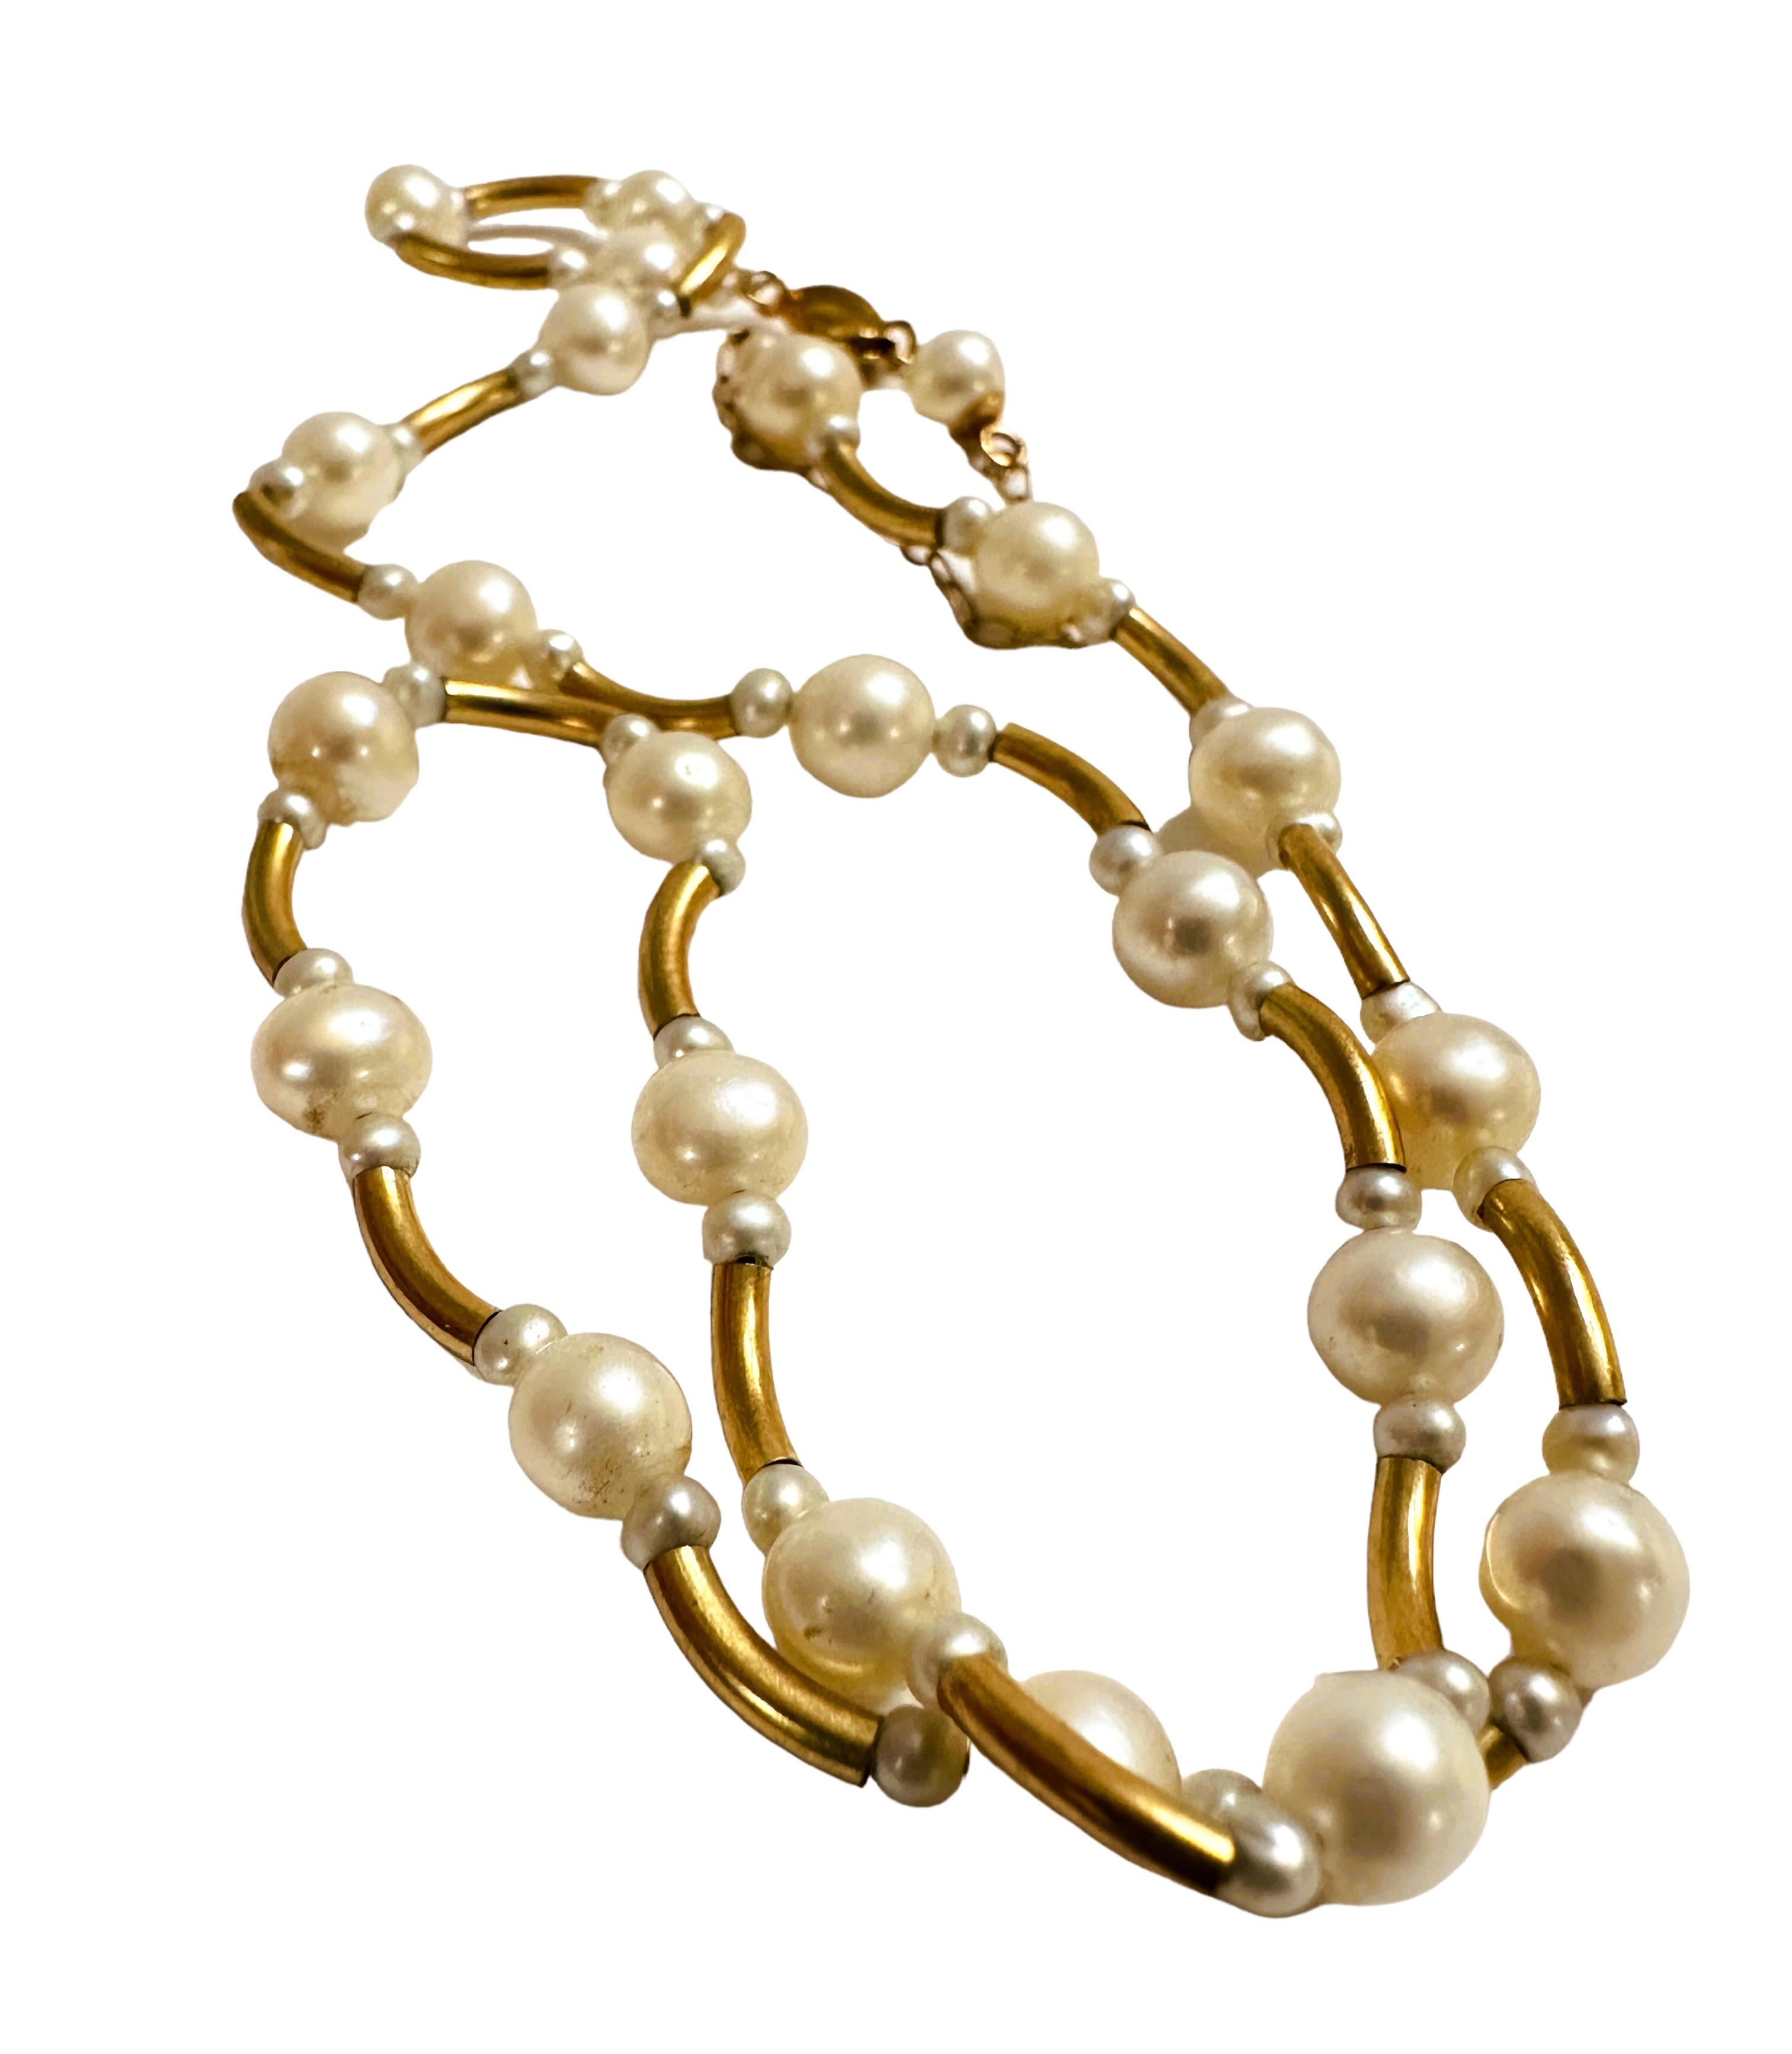 Women's Vintage 14K Yellow Gold and Pearl Peter Bram Necklace 16 - 19 Inches